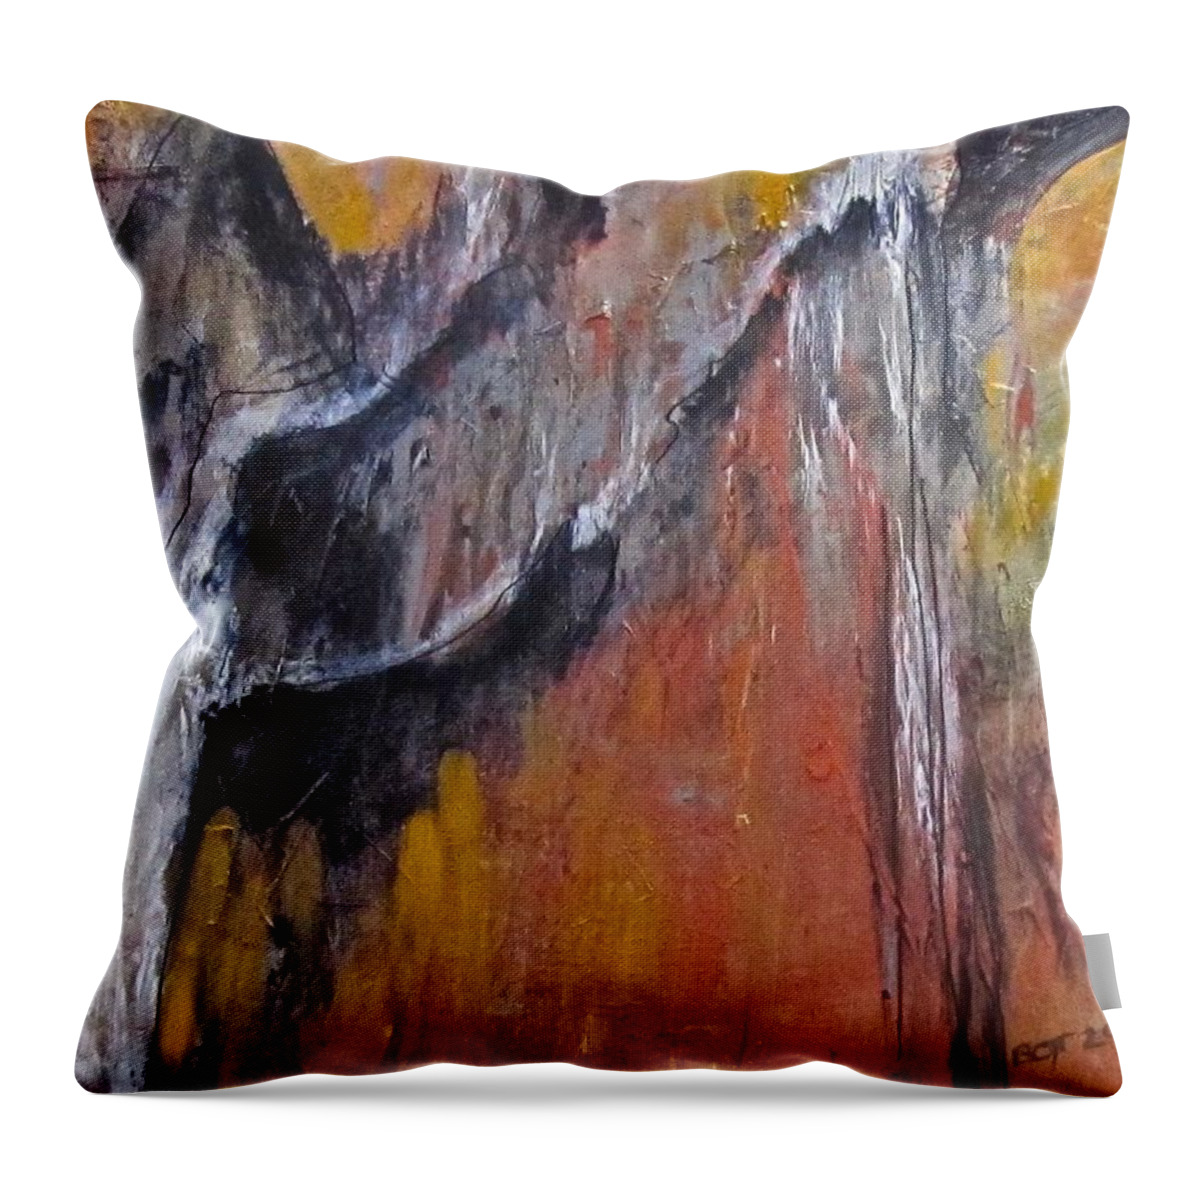 Metallic Throw Pillow featuring the painting Cascades by Barbara O'Toole